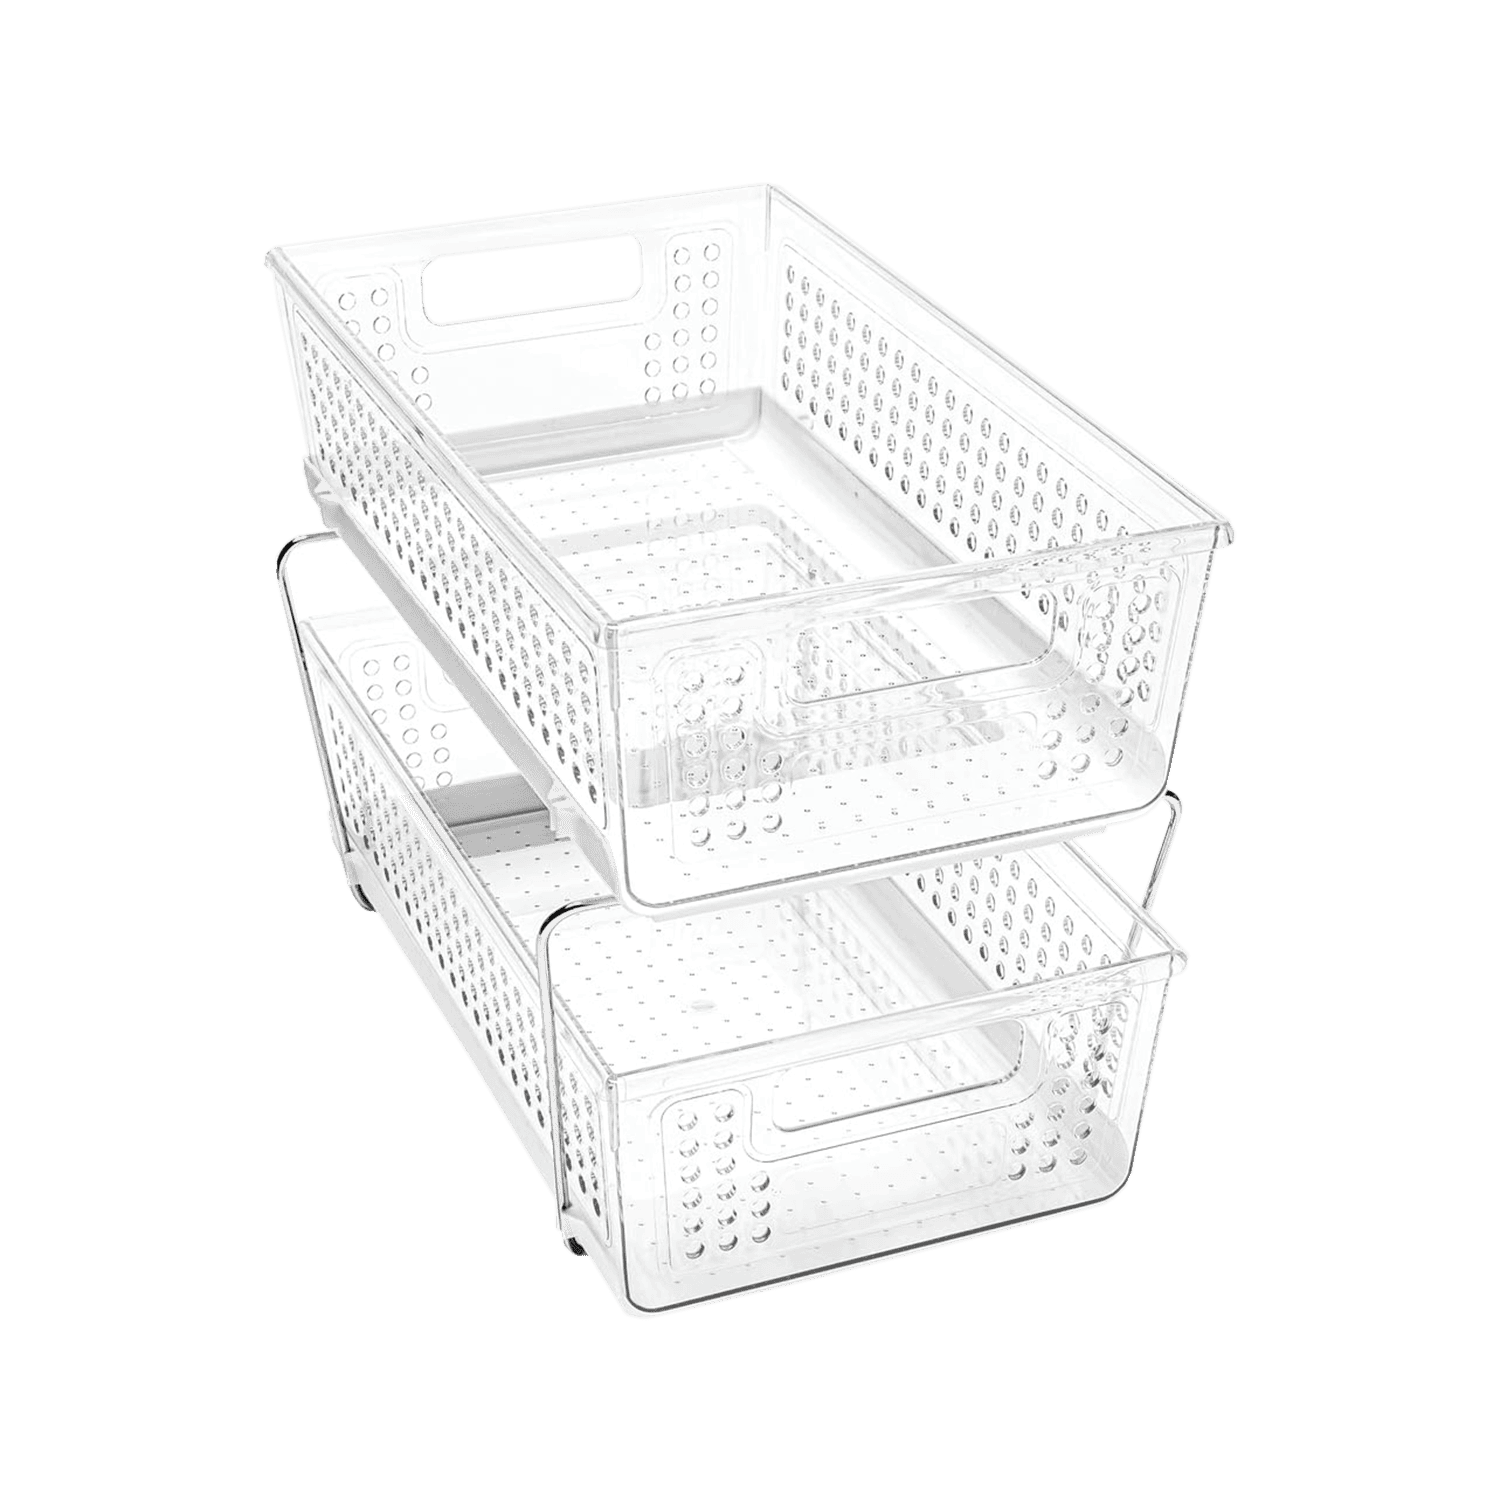 Madesmart Two Level Storage Baskets & Dividers